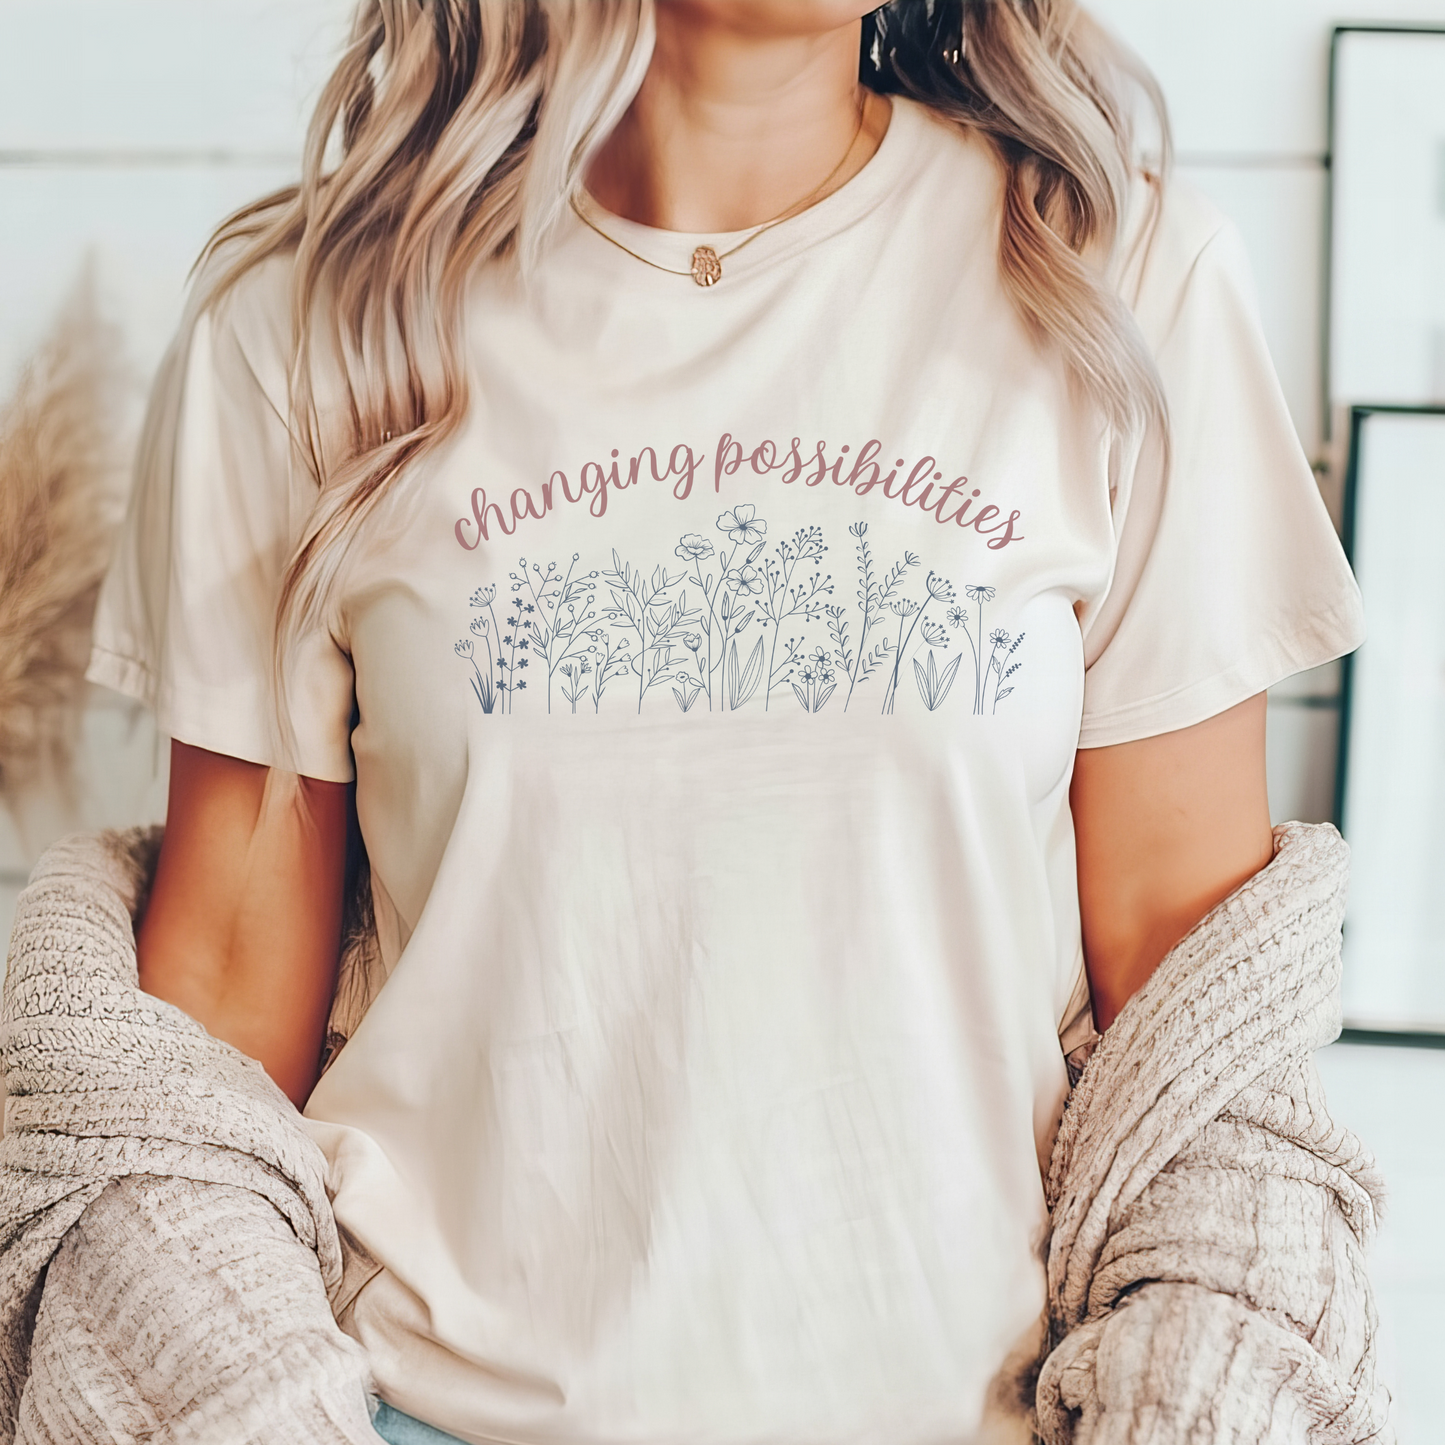 The front of this tshirt has the empowering words Changing Possibilities over a beautiful wildflower design. This tee celebrates advocates who are changing the world. Join the movement to change possibilities and create a culture of empowerment.